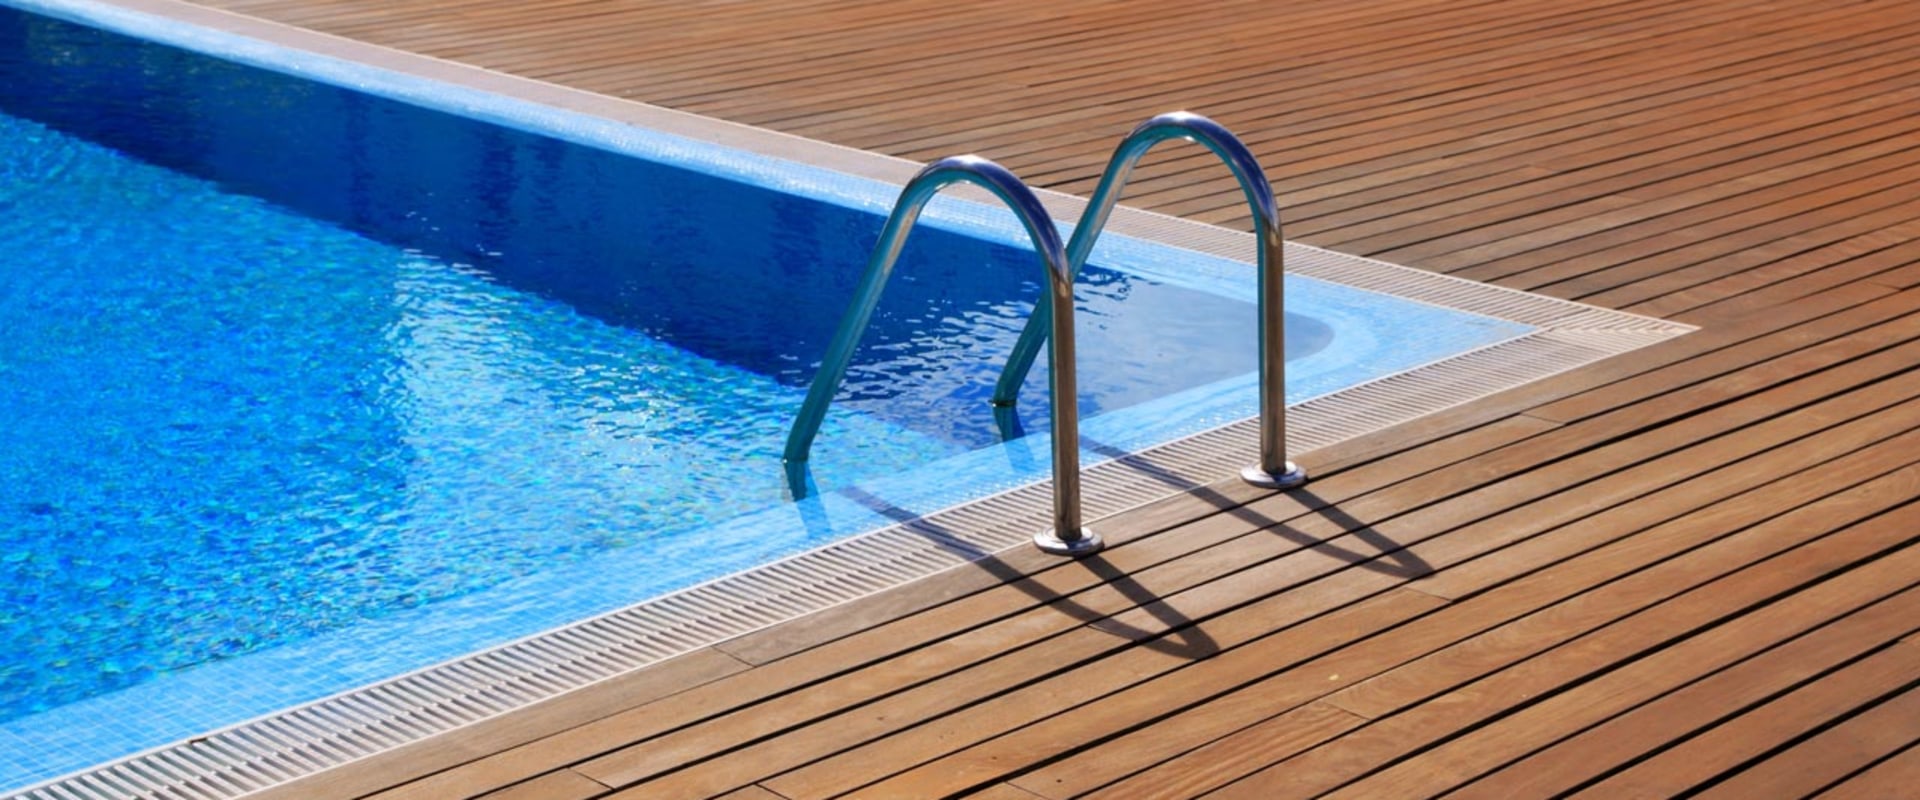 How much does coping around a pool cost?